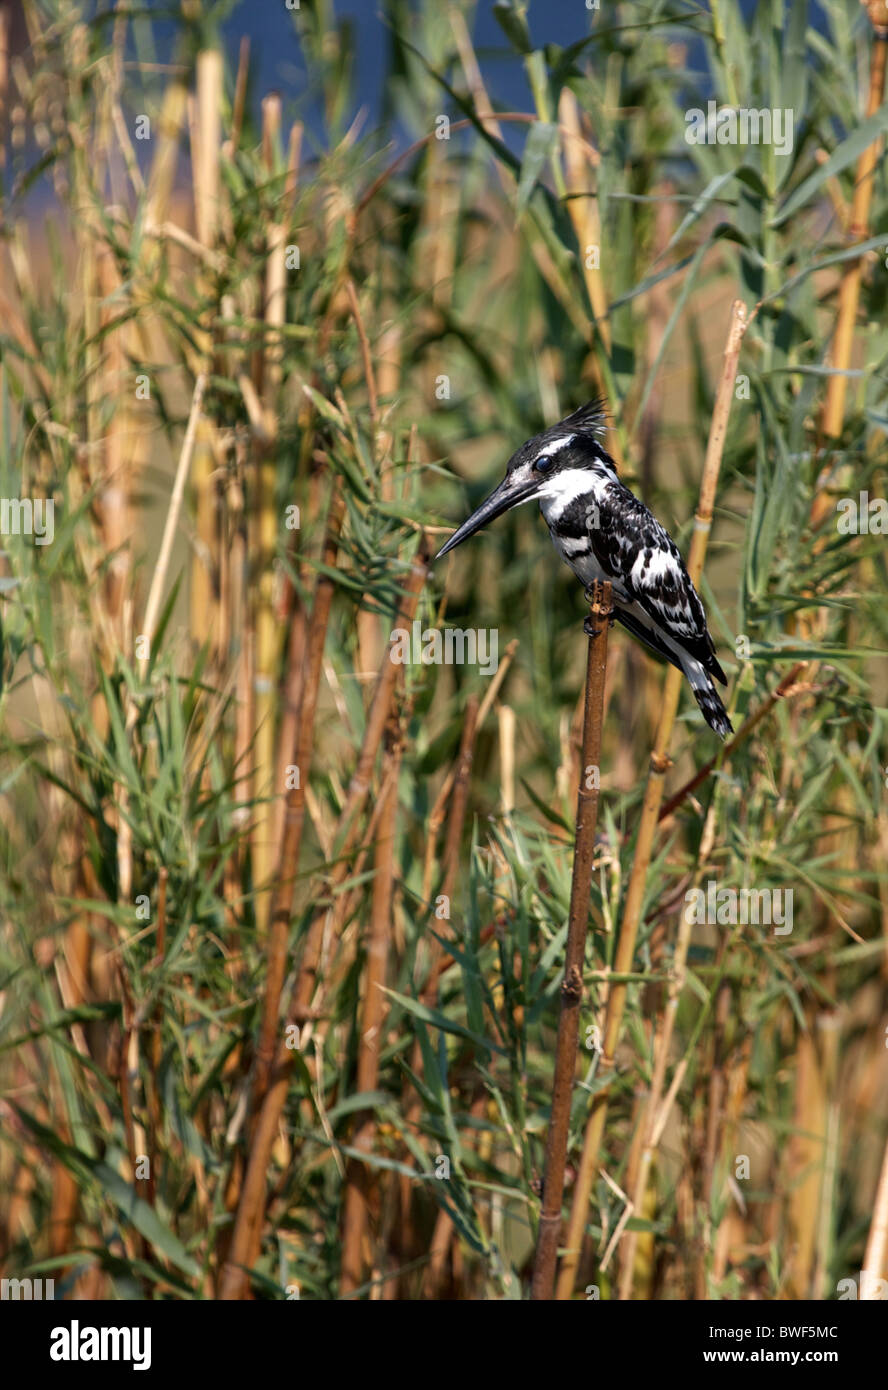 Pied kingfisher perching on tall reeds Stock Photo